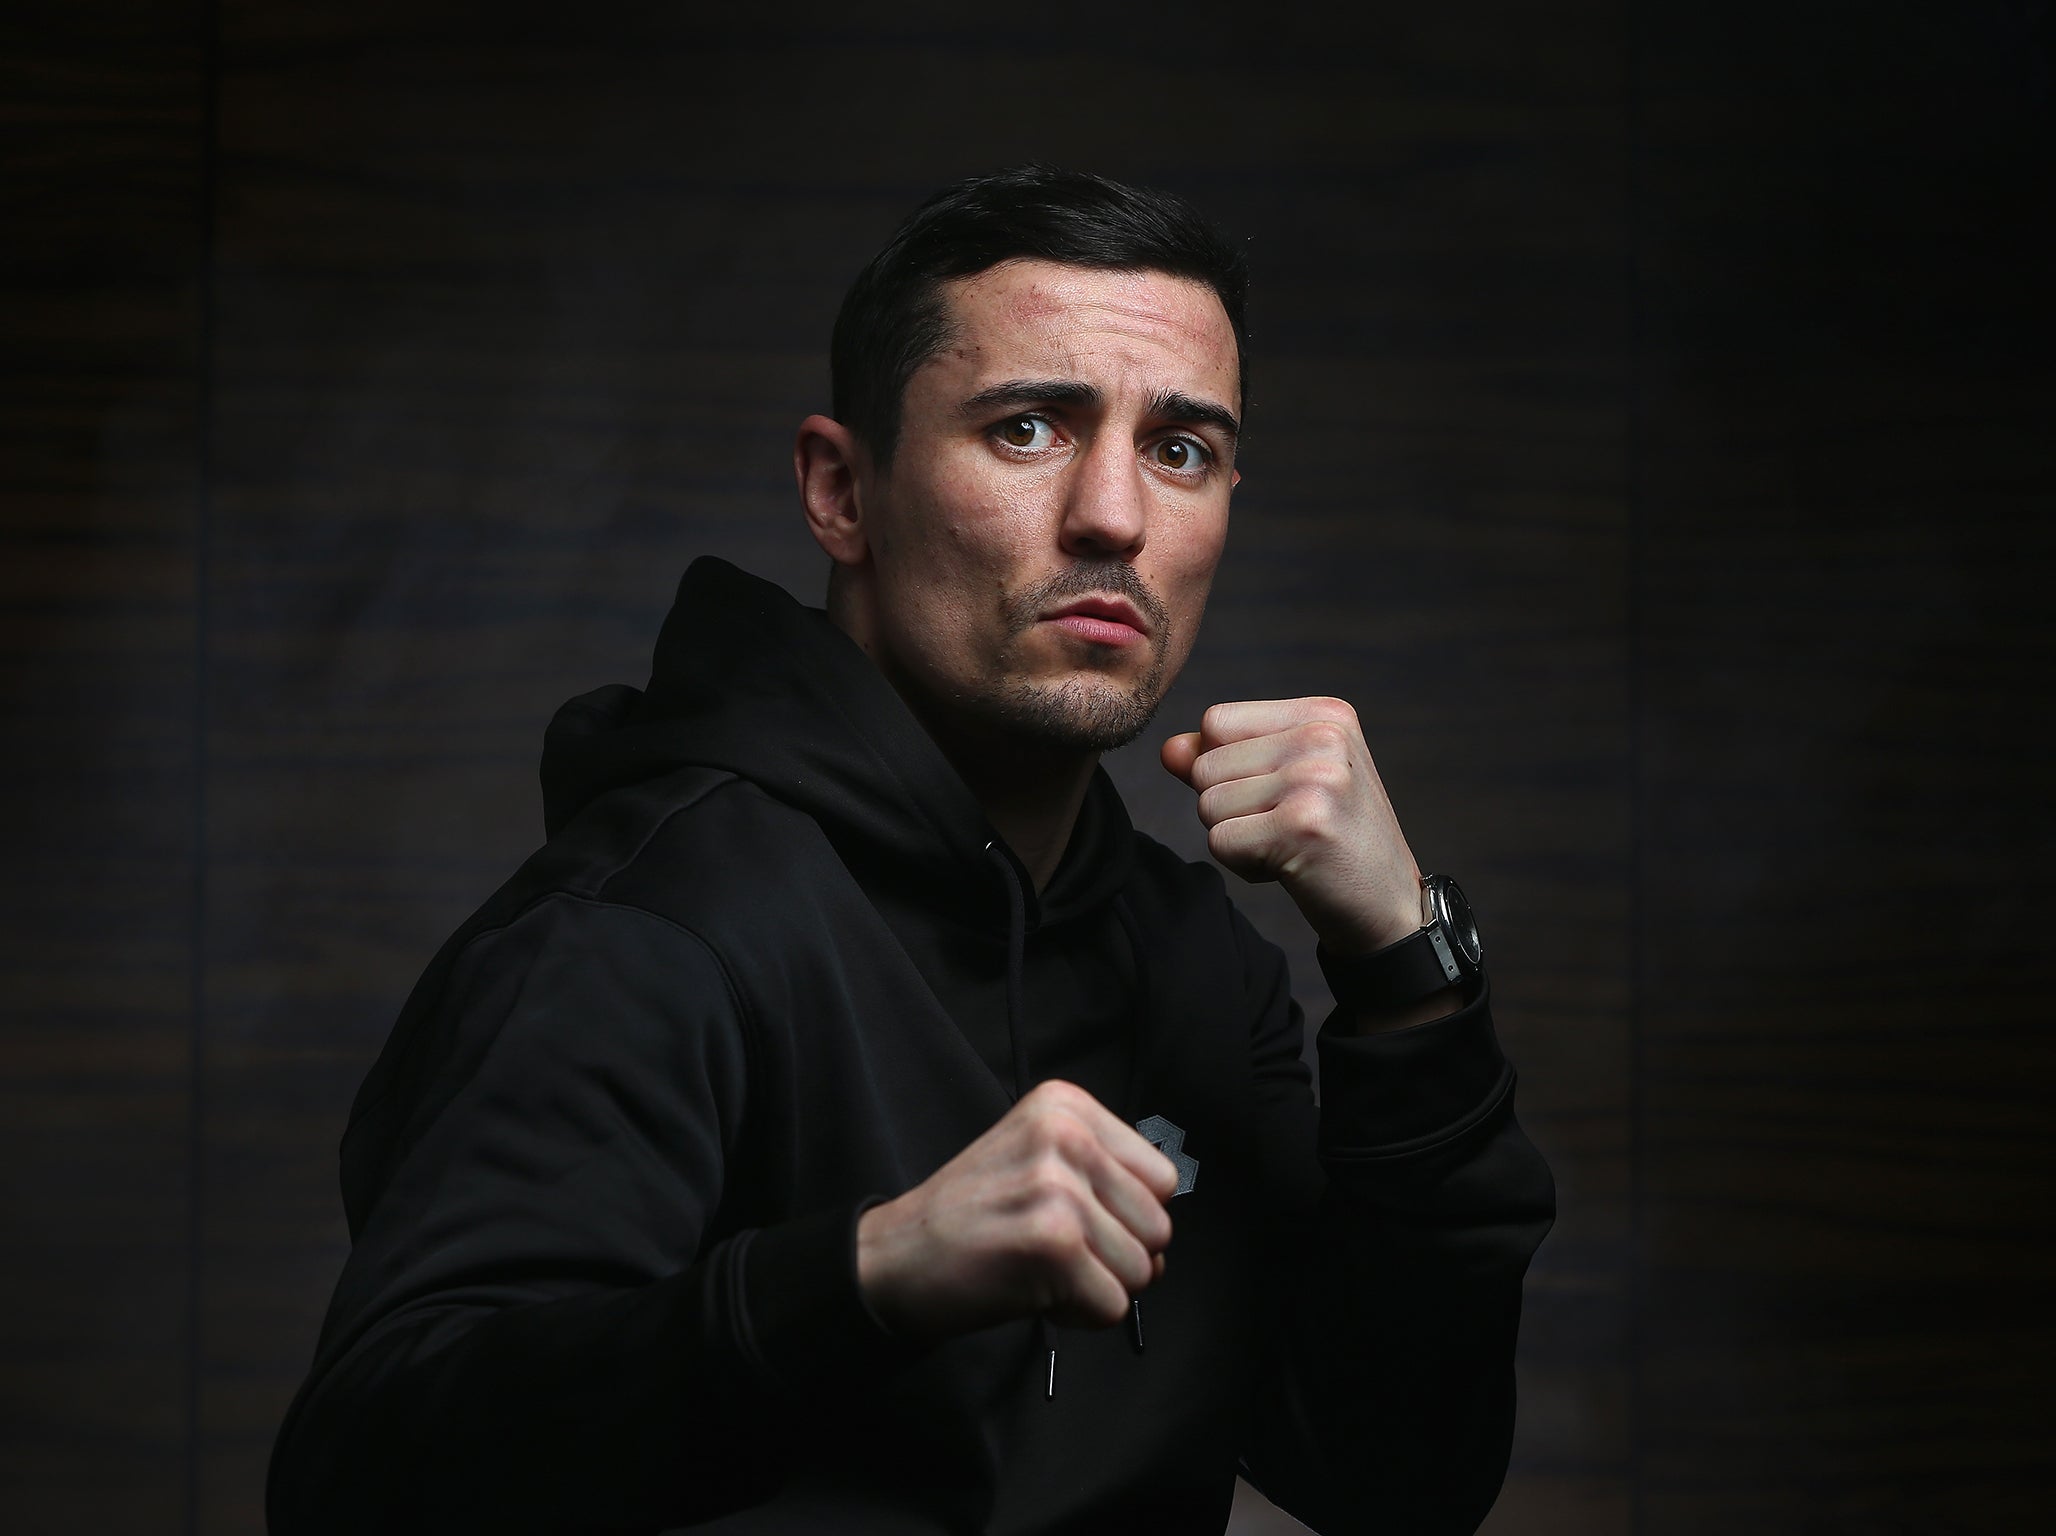 Crolla has campaigned at 135lbs for most of his career